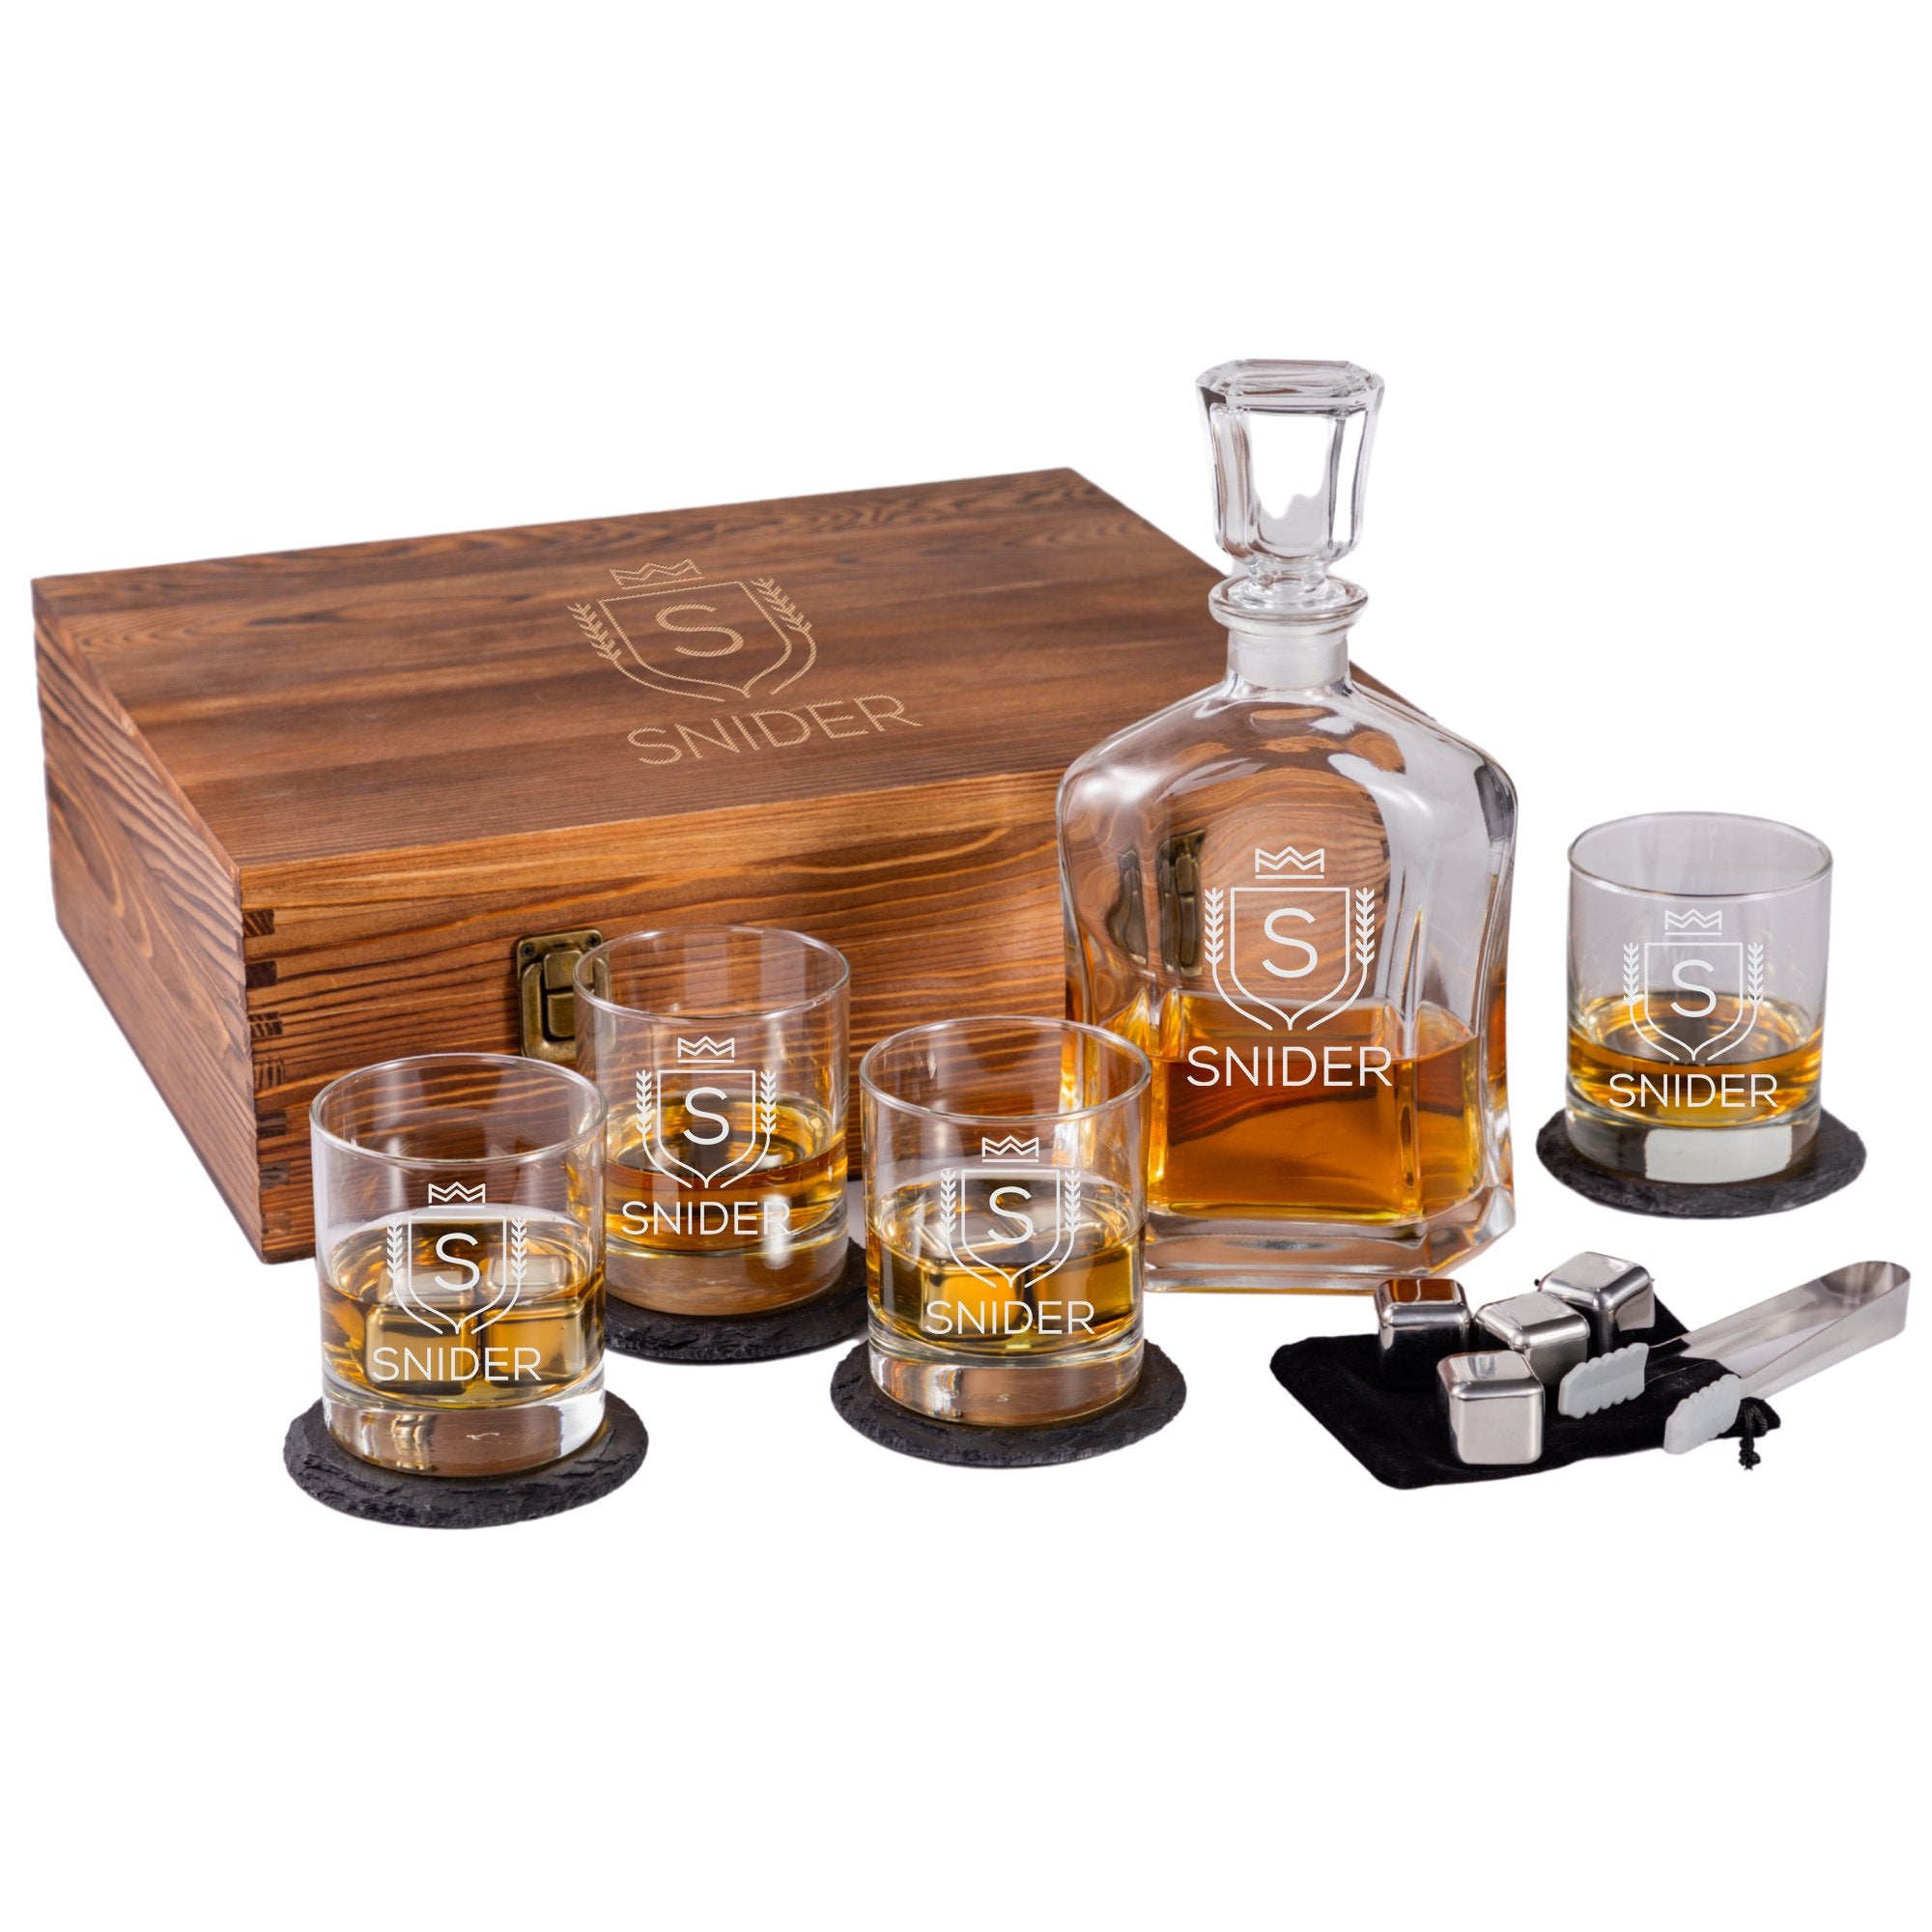 LAVO - 👨🏻FATHER'S DAY WHISKEY GIFT BOX SPECIAL 🎉🎊 Give Dad